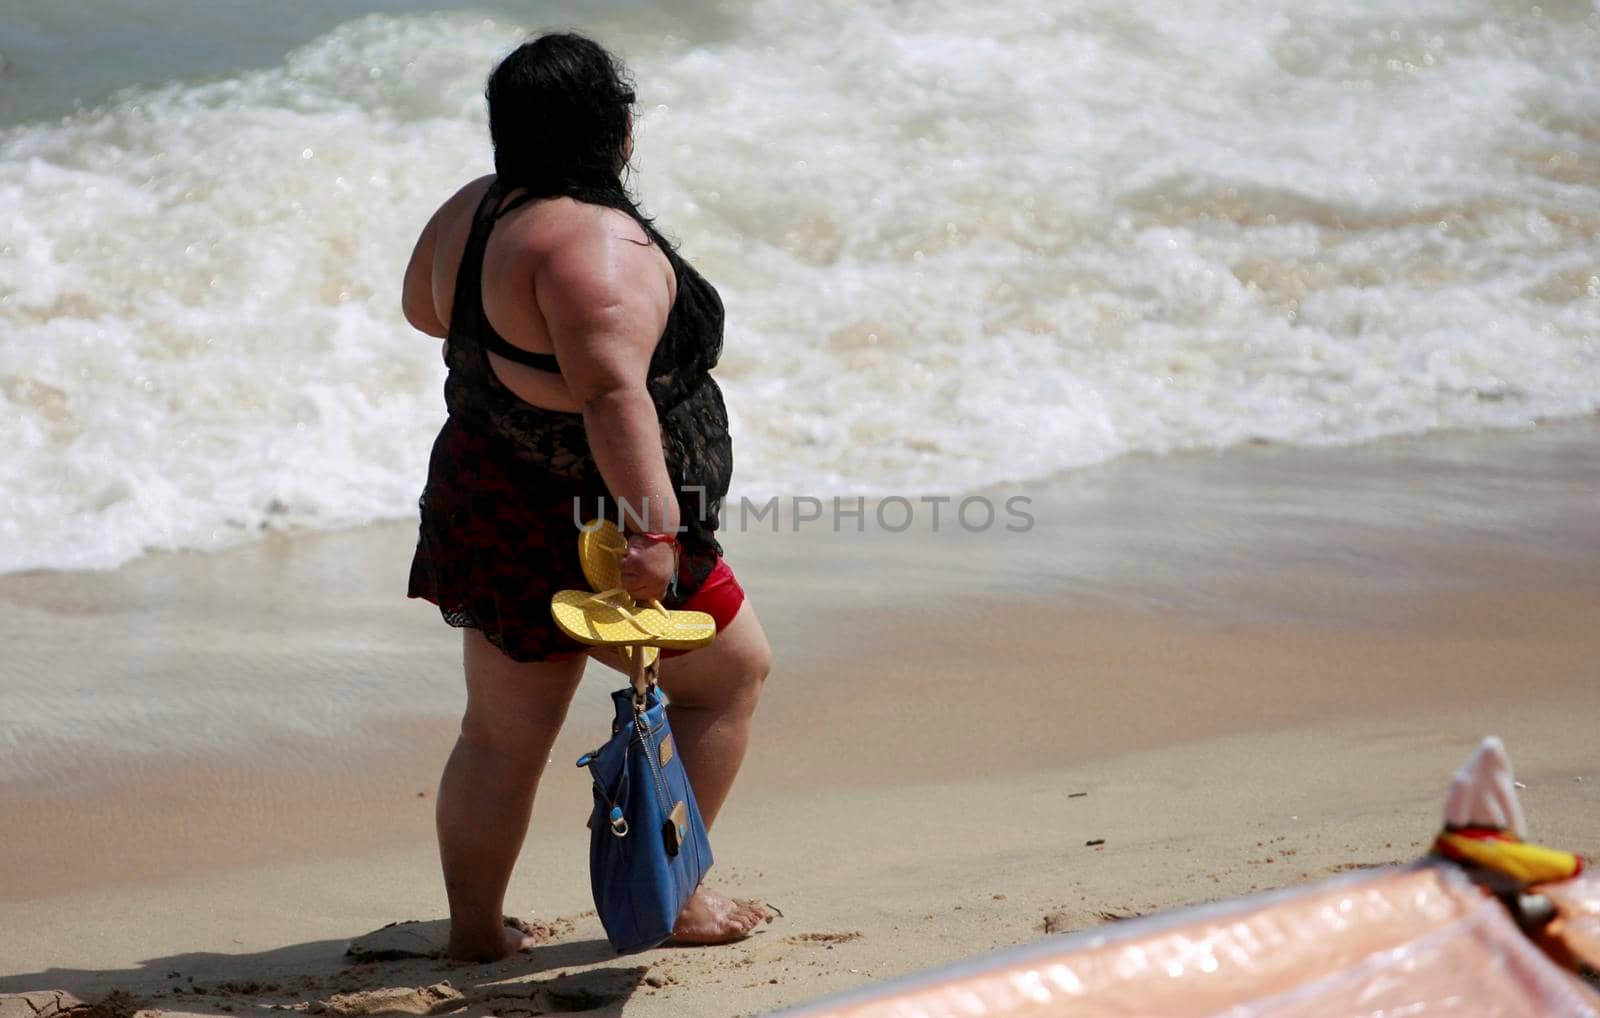 salvador, bahia / brazil - february 17, 2015: fat woman is seen on Itapua beach in the city of Salvador.